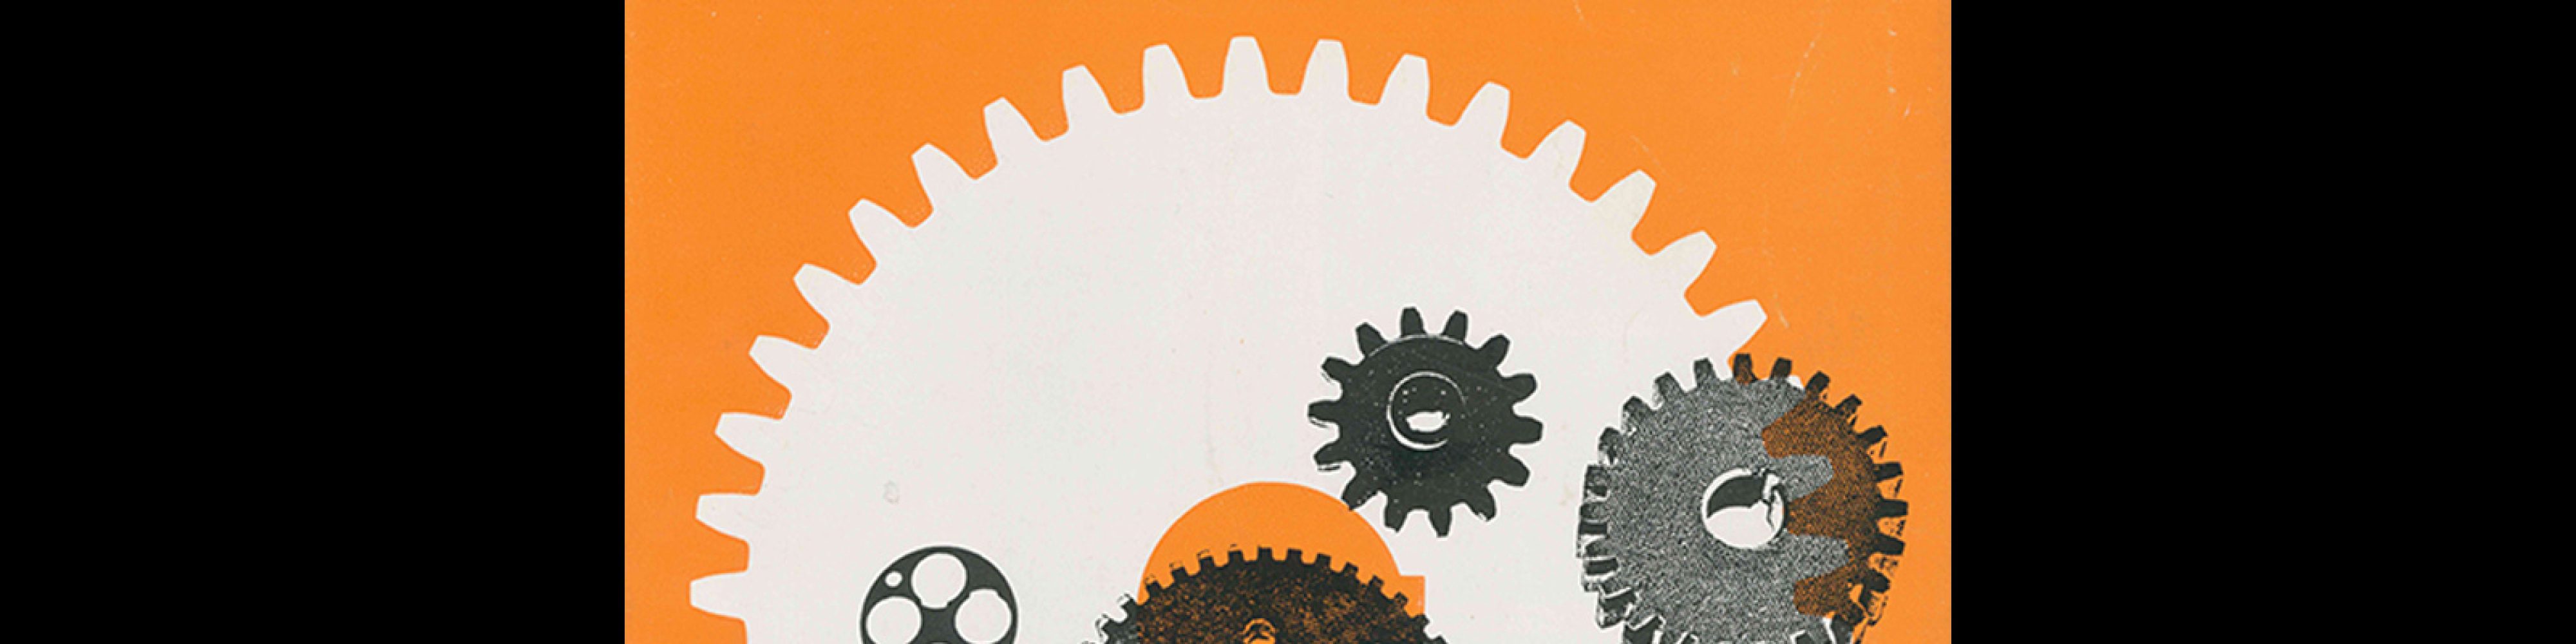 TUFNOL, For the Mechanical Engineer, Brochure, 1960s. Design and print by The Kynoch Press